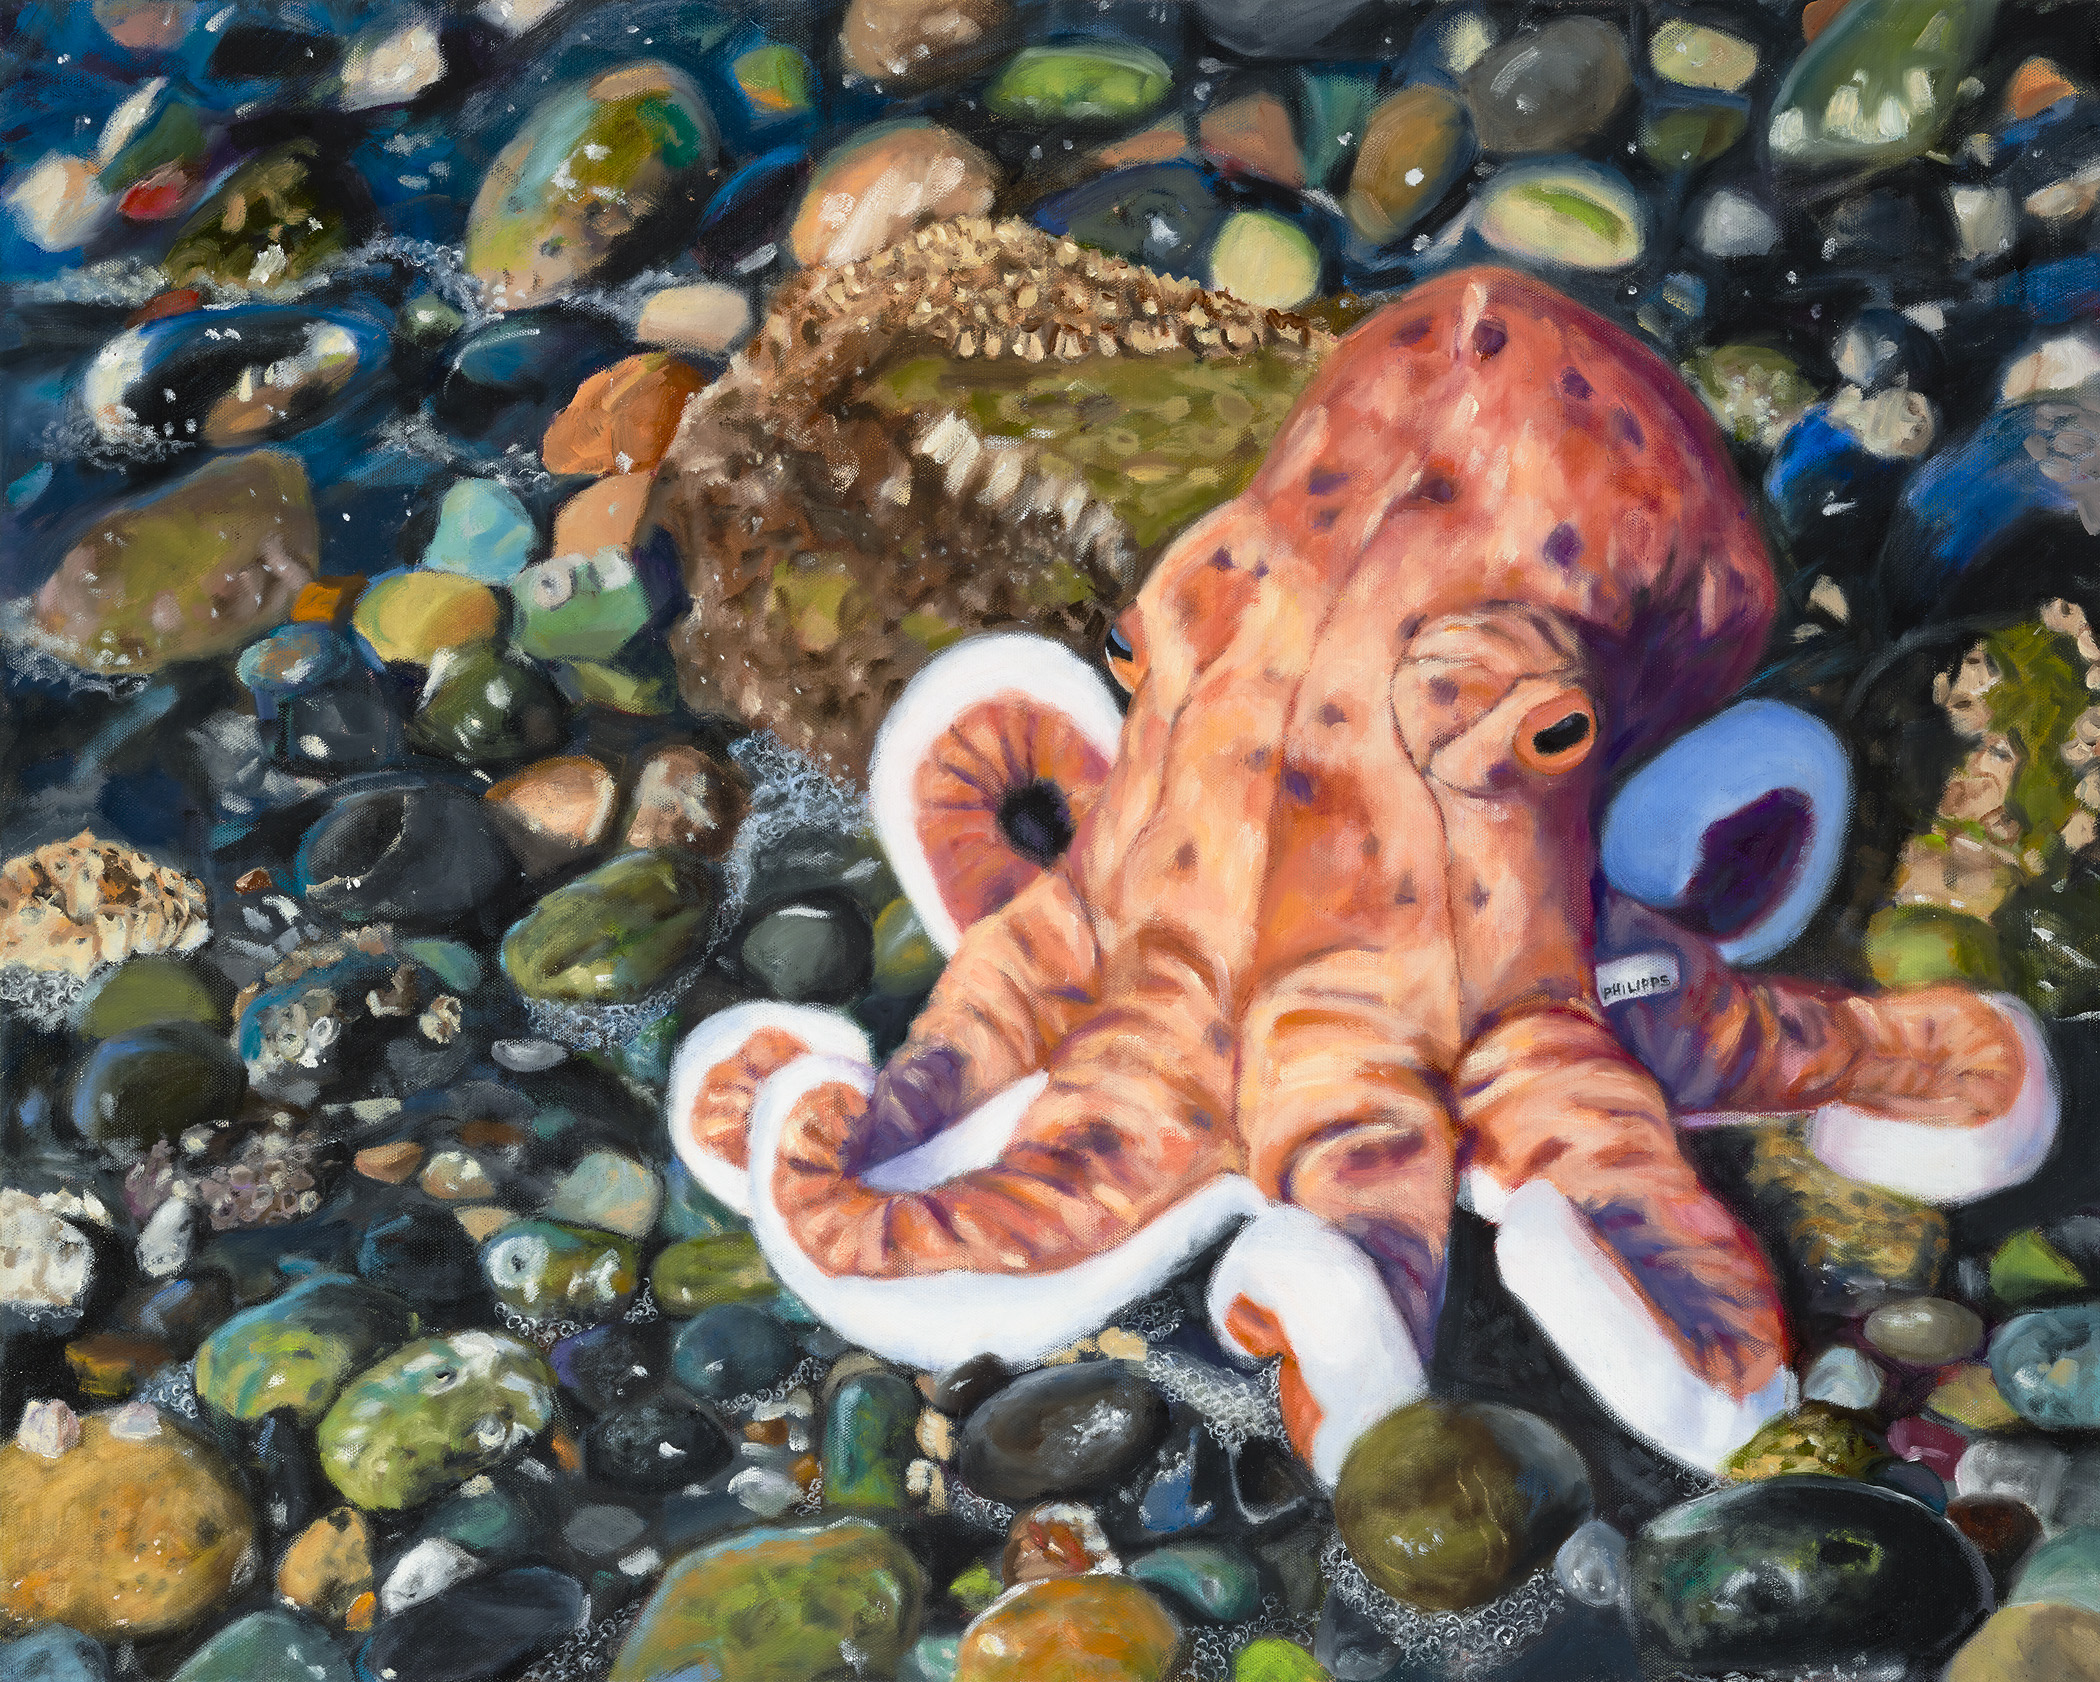 "Last Call: Giant Pacific Octopus", Oil on Gallery Wrapped Canvas, copyright Lisa Philipps, 2019.